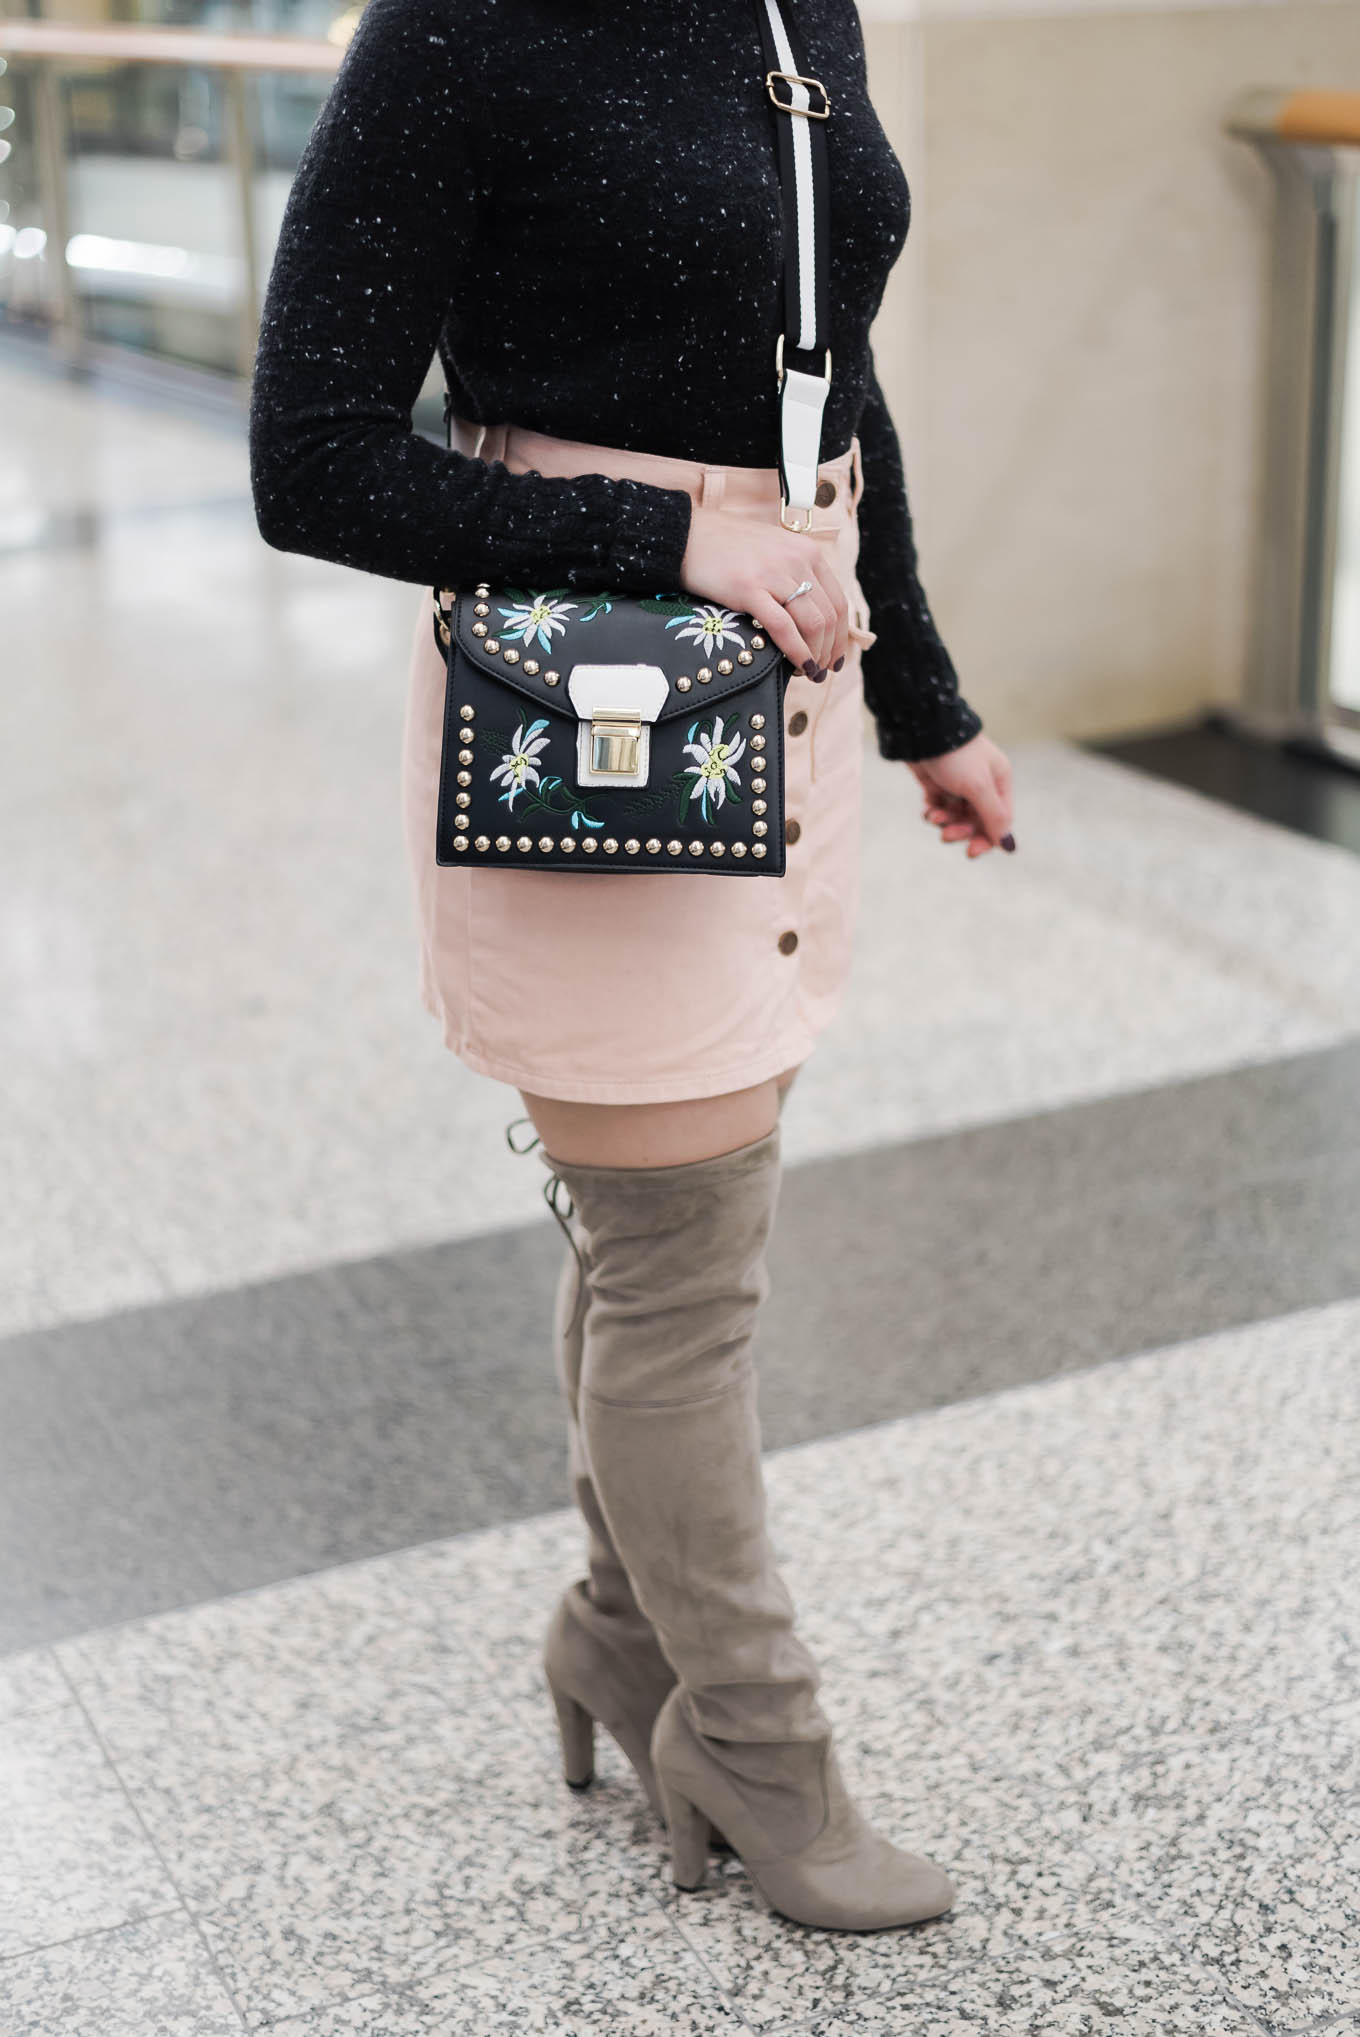 Lifestyle blogger Roxanne of Glass of Glam wearing a MINKPINK denim skirt, otk boots, a Madewell sweater, pom hat, and a rivet crossbody bag